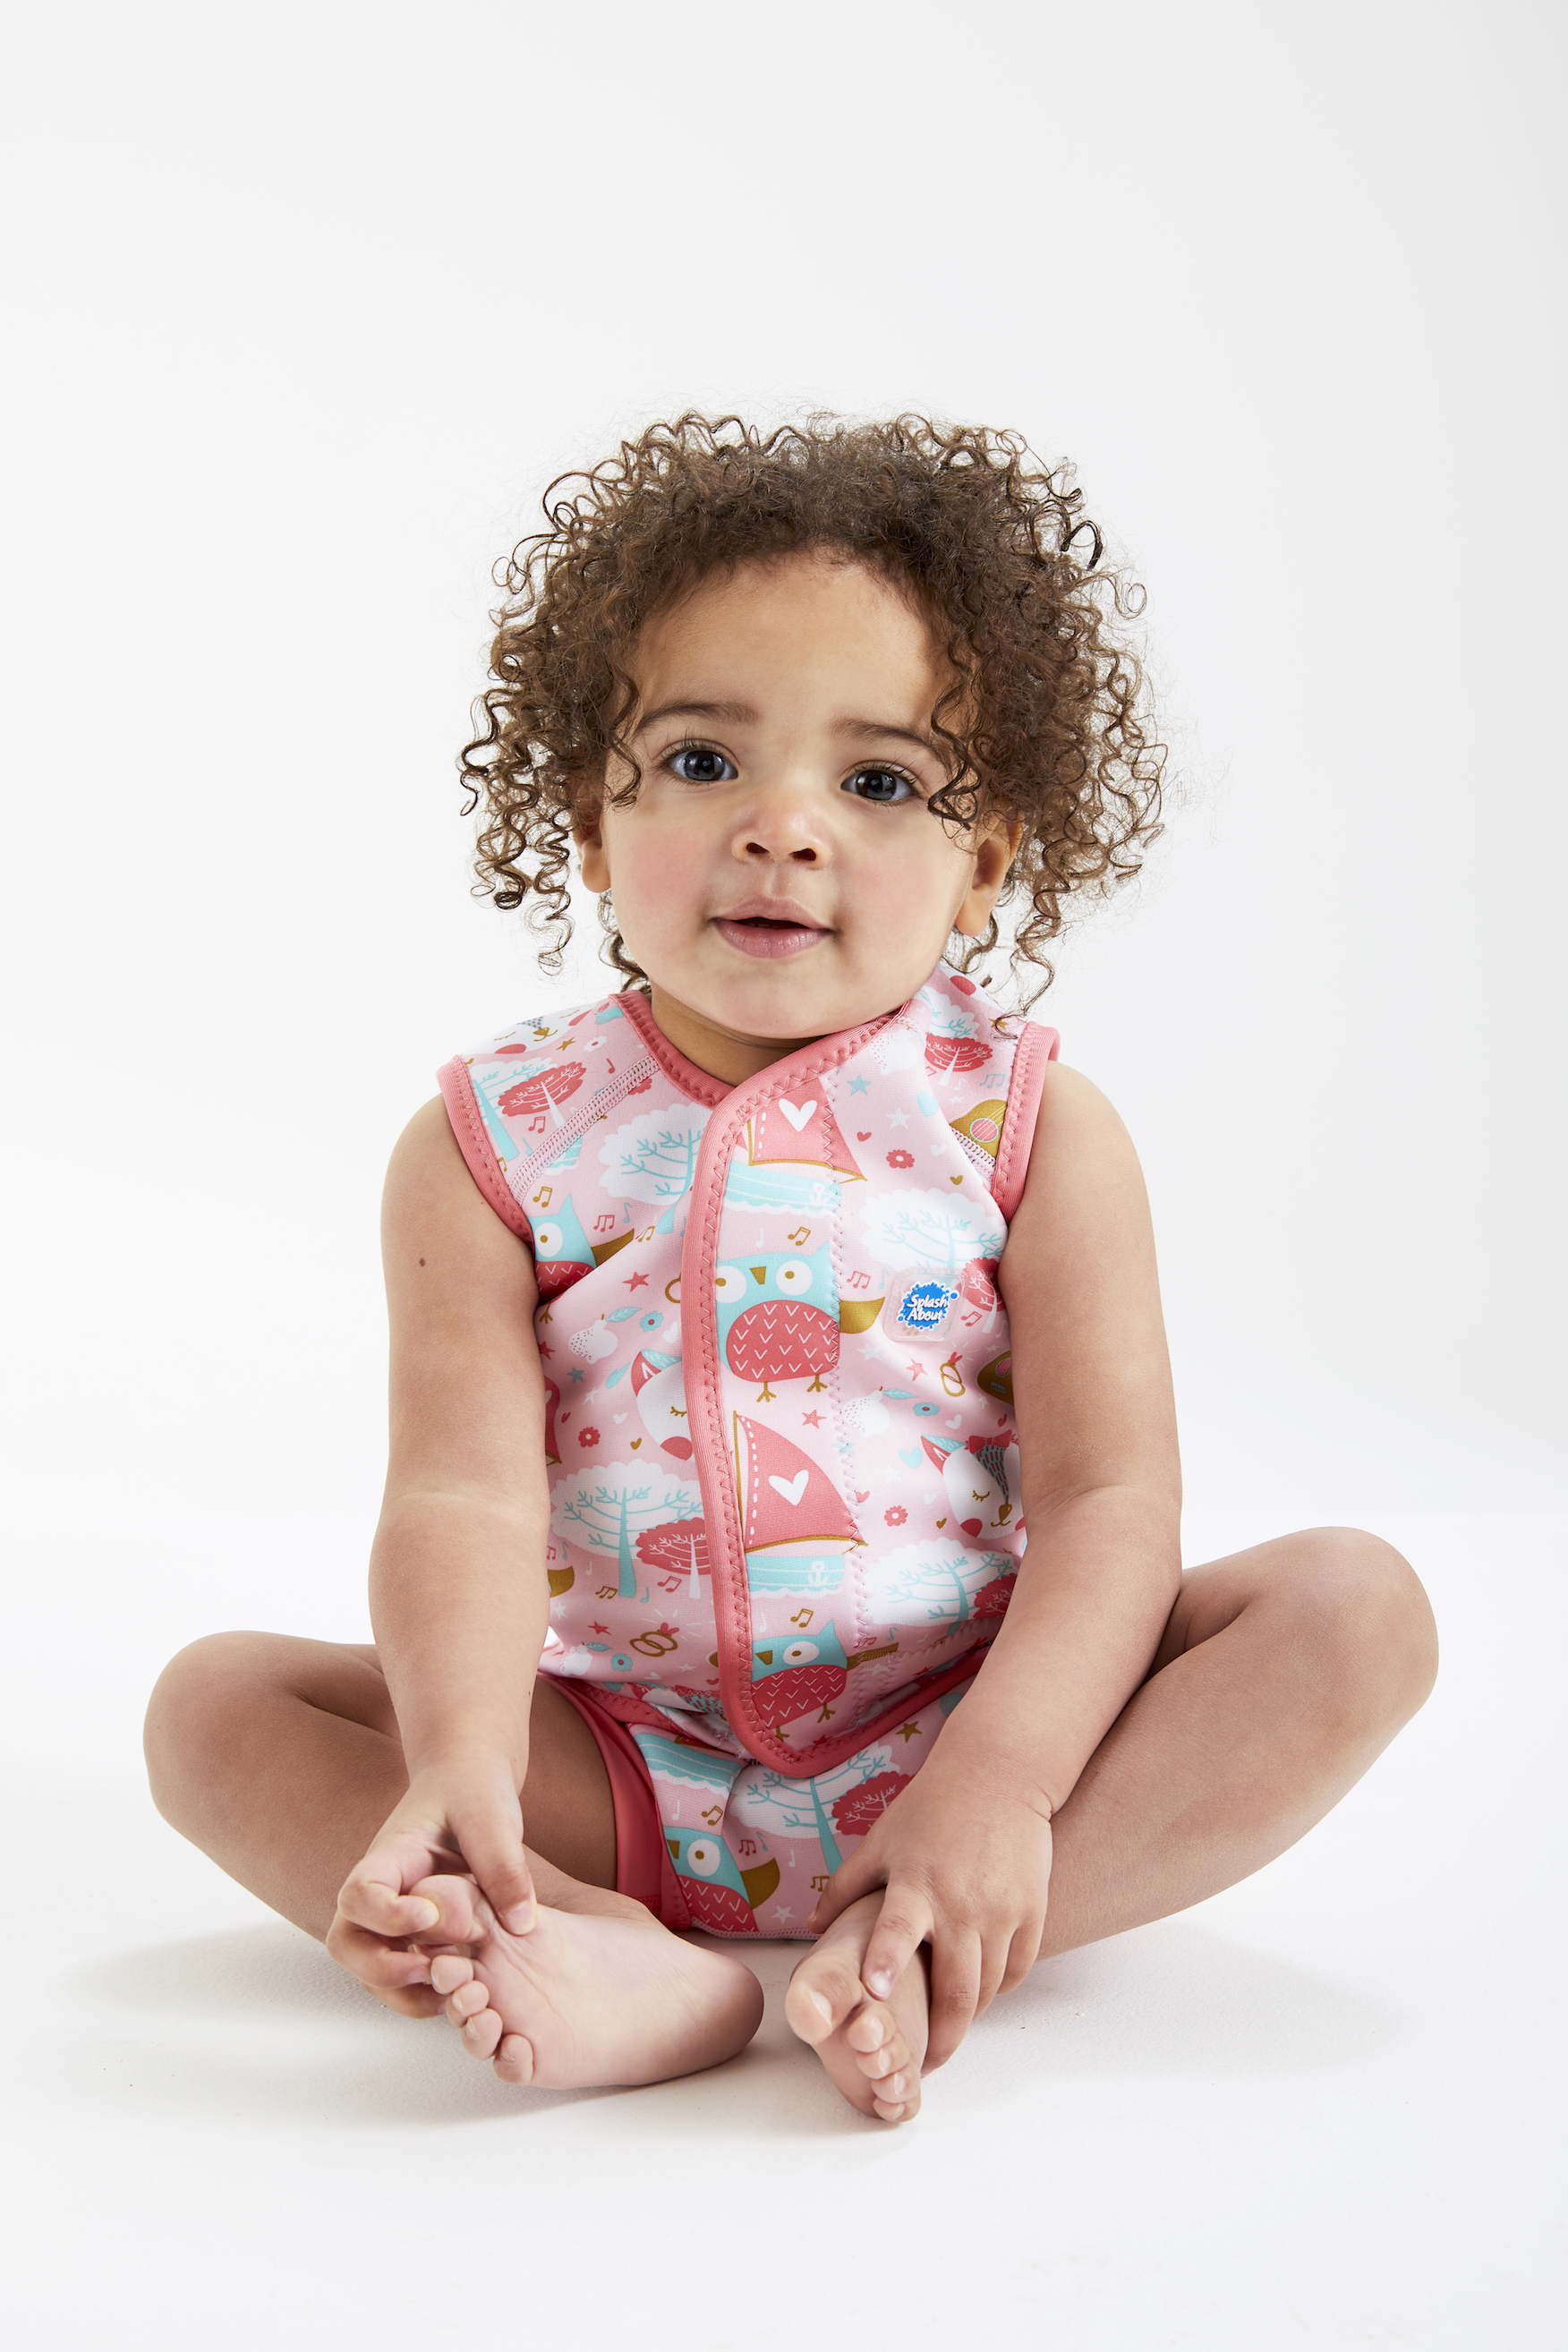 Splash About Warm in One Baby Wetsuit and matching New Improved Happy Nappy